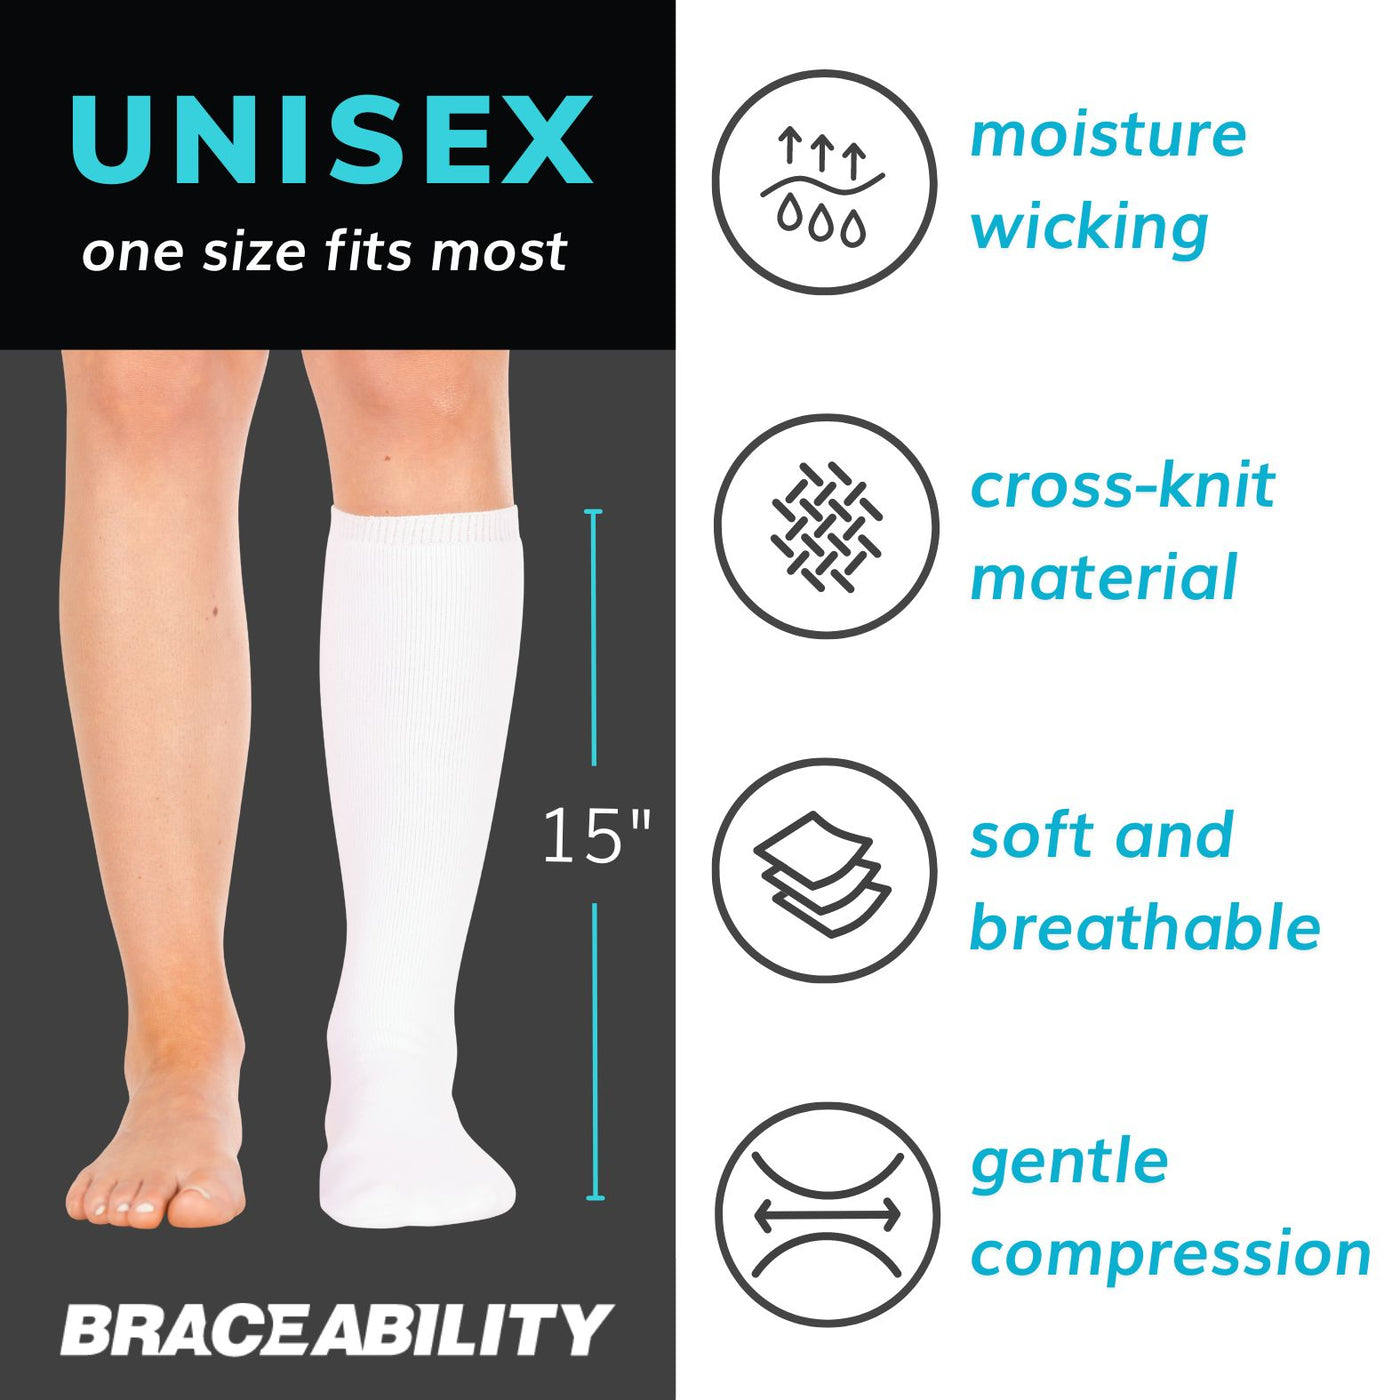 Medical compression sock promotes proper circulation, helping you heal from a foot or ankle injury